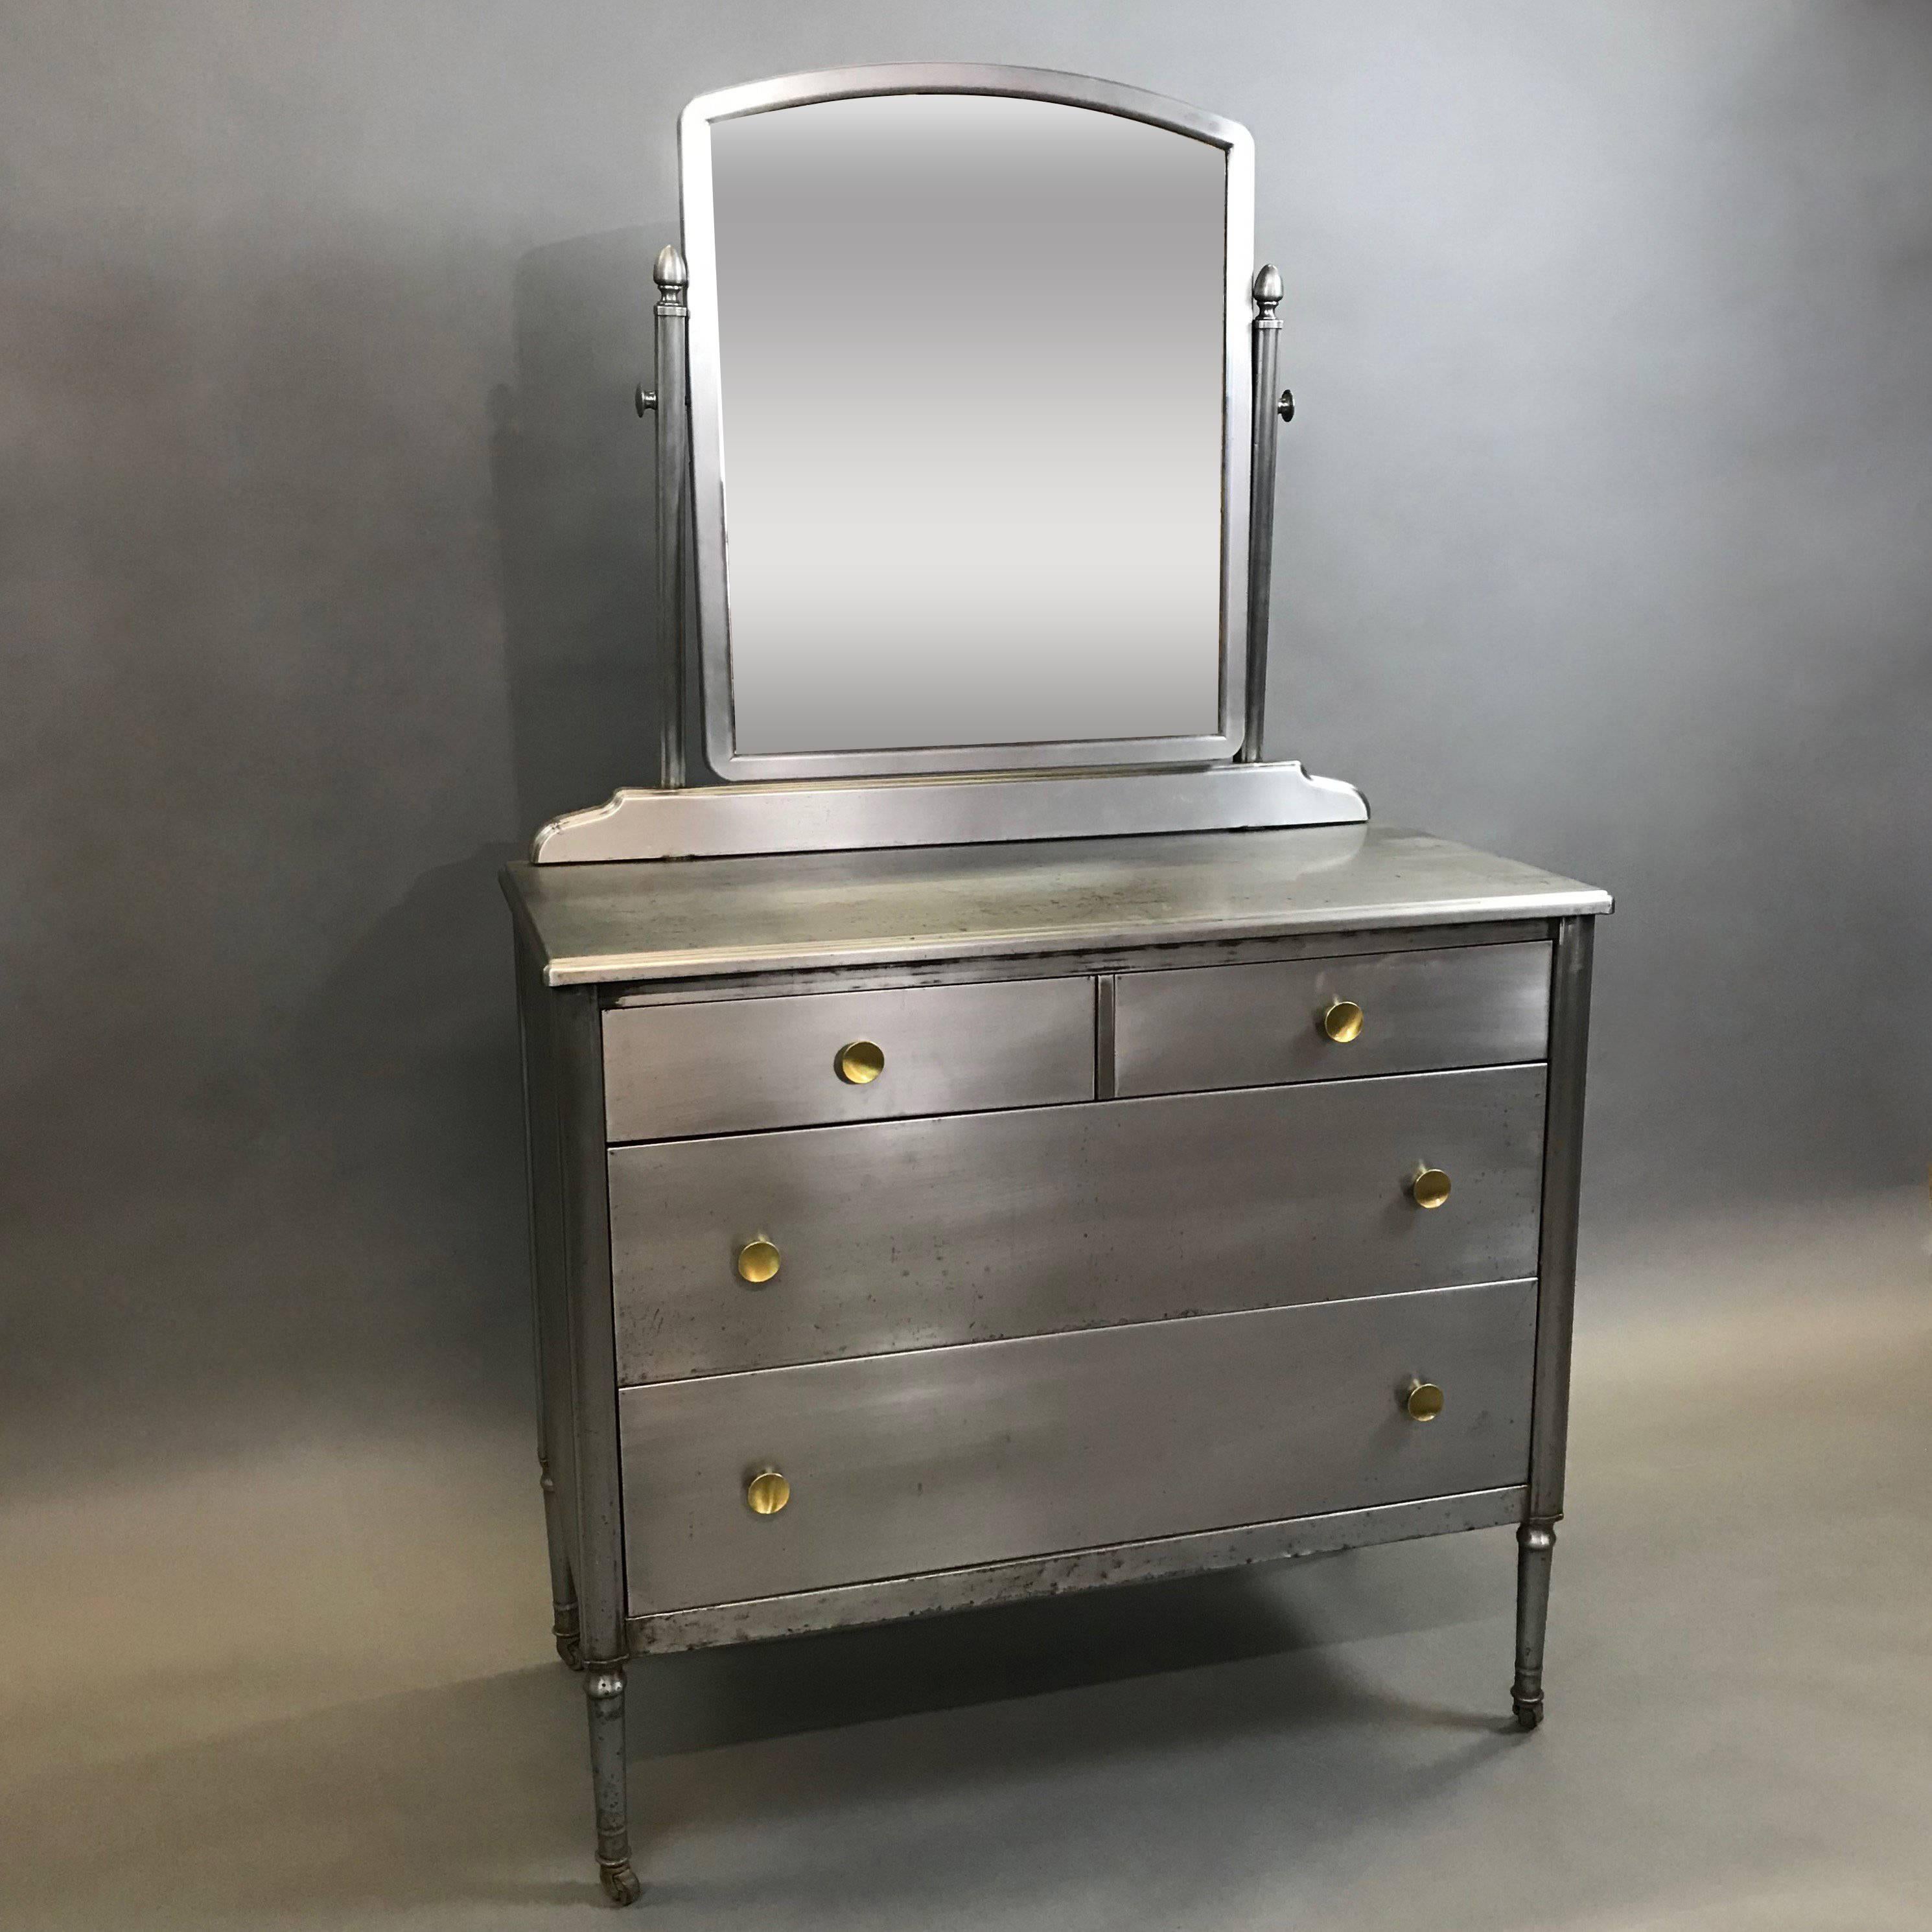 Wonderfully detailed, Sheraton series, pressed steel dresser with original tilt adjustable mirror by Simmons Furniture Company features drawers with brass pulls, interior blue paint on rolling casters.

Dresser dimensions are 40in W x 19in D x